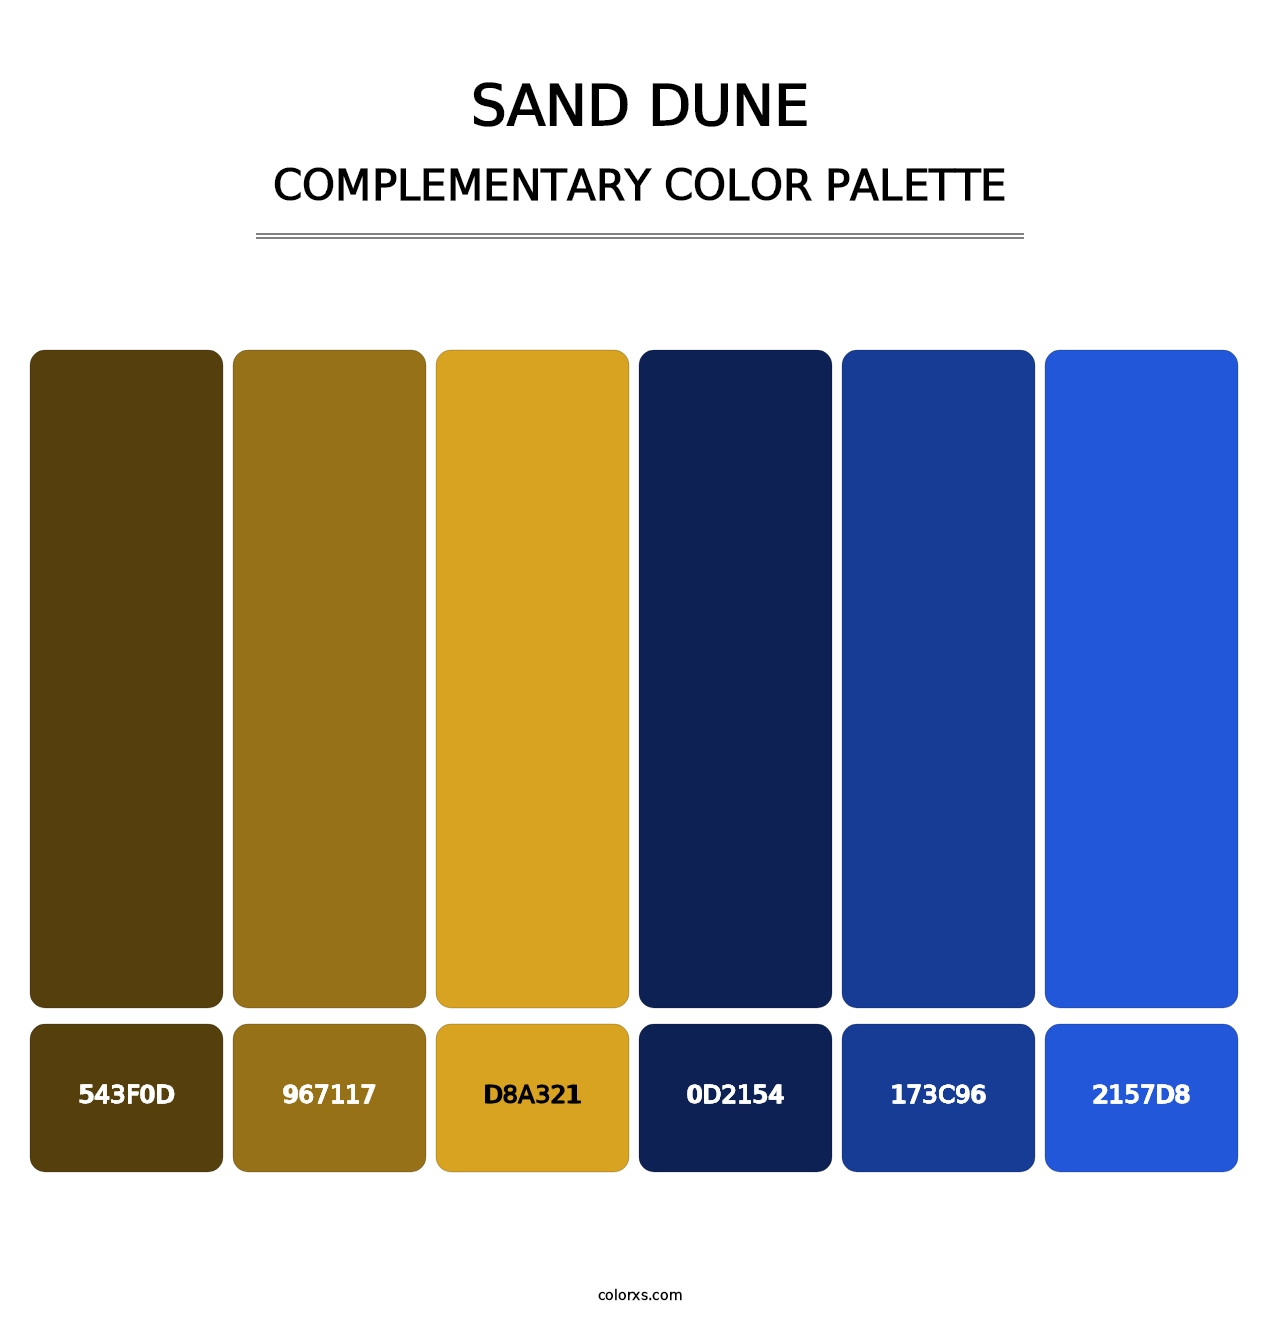 Sand Dune - Complementary Color Palette